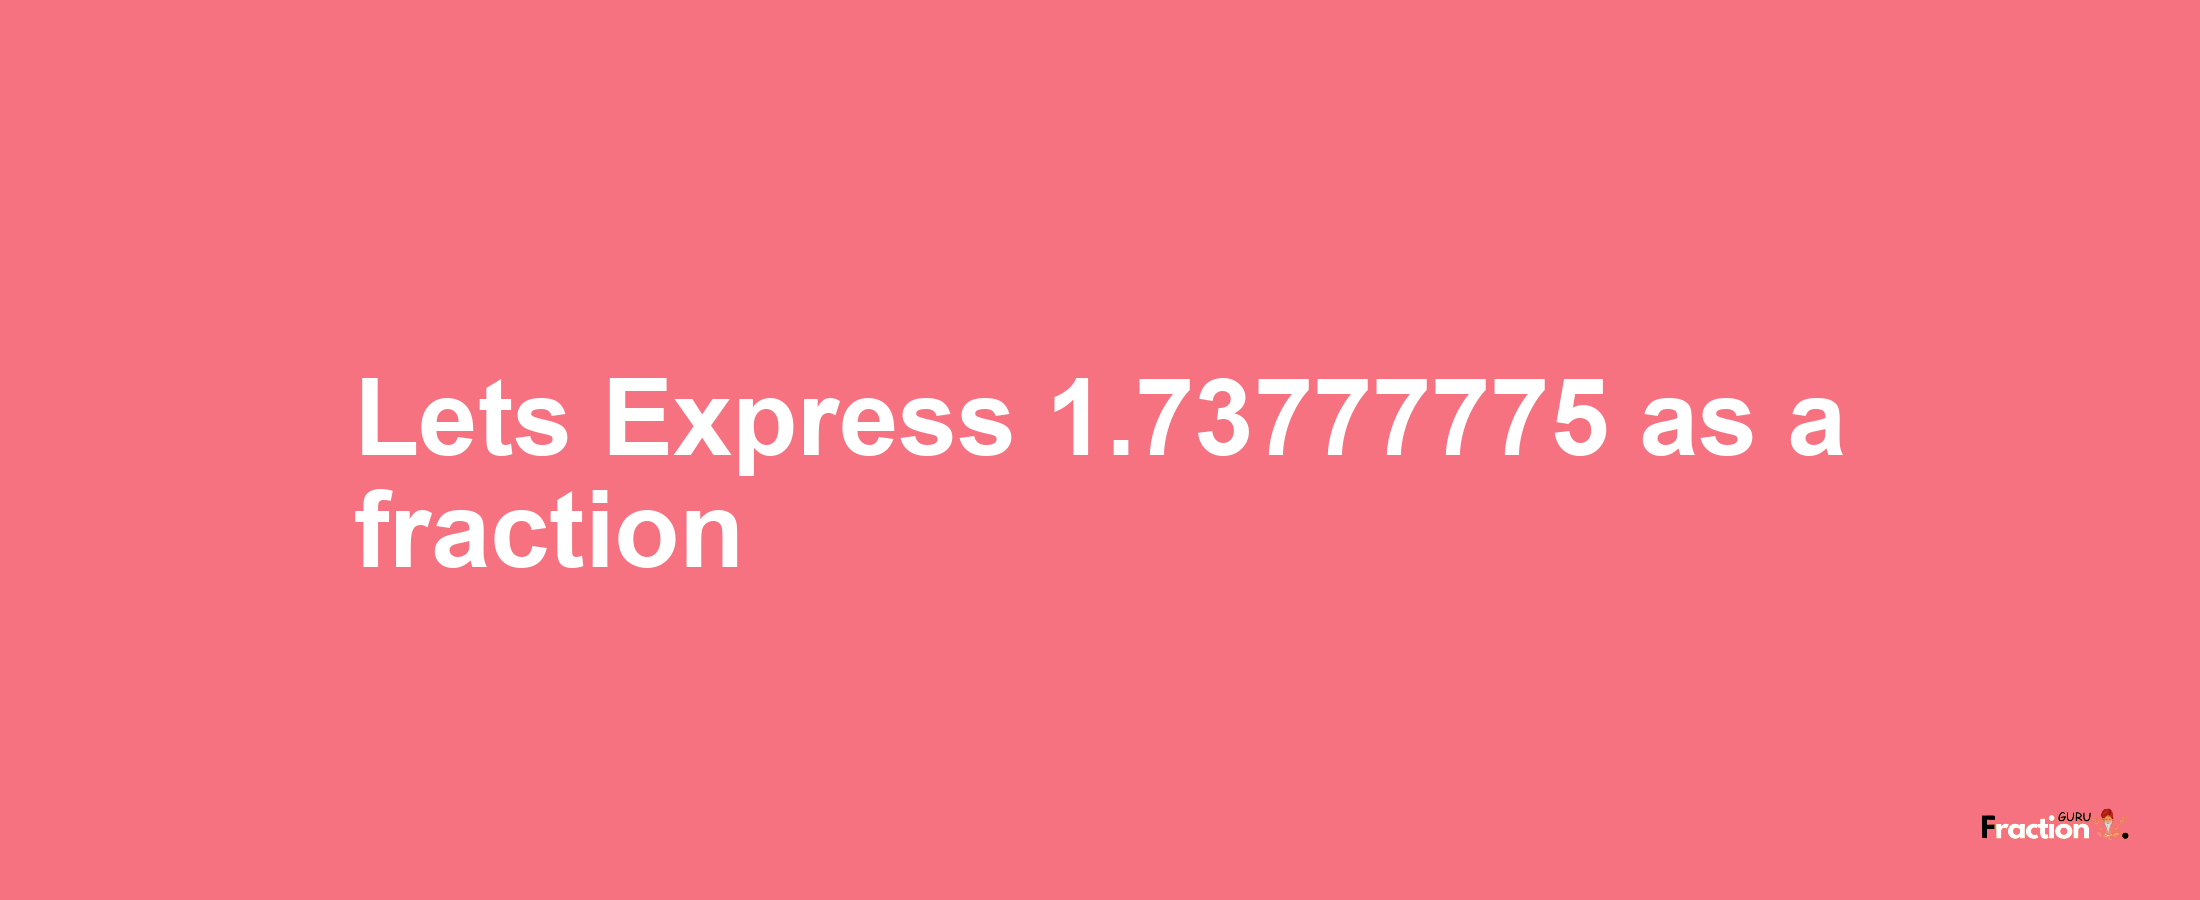 Lets Express 1.73777775 as afraction